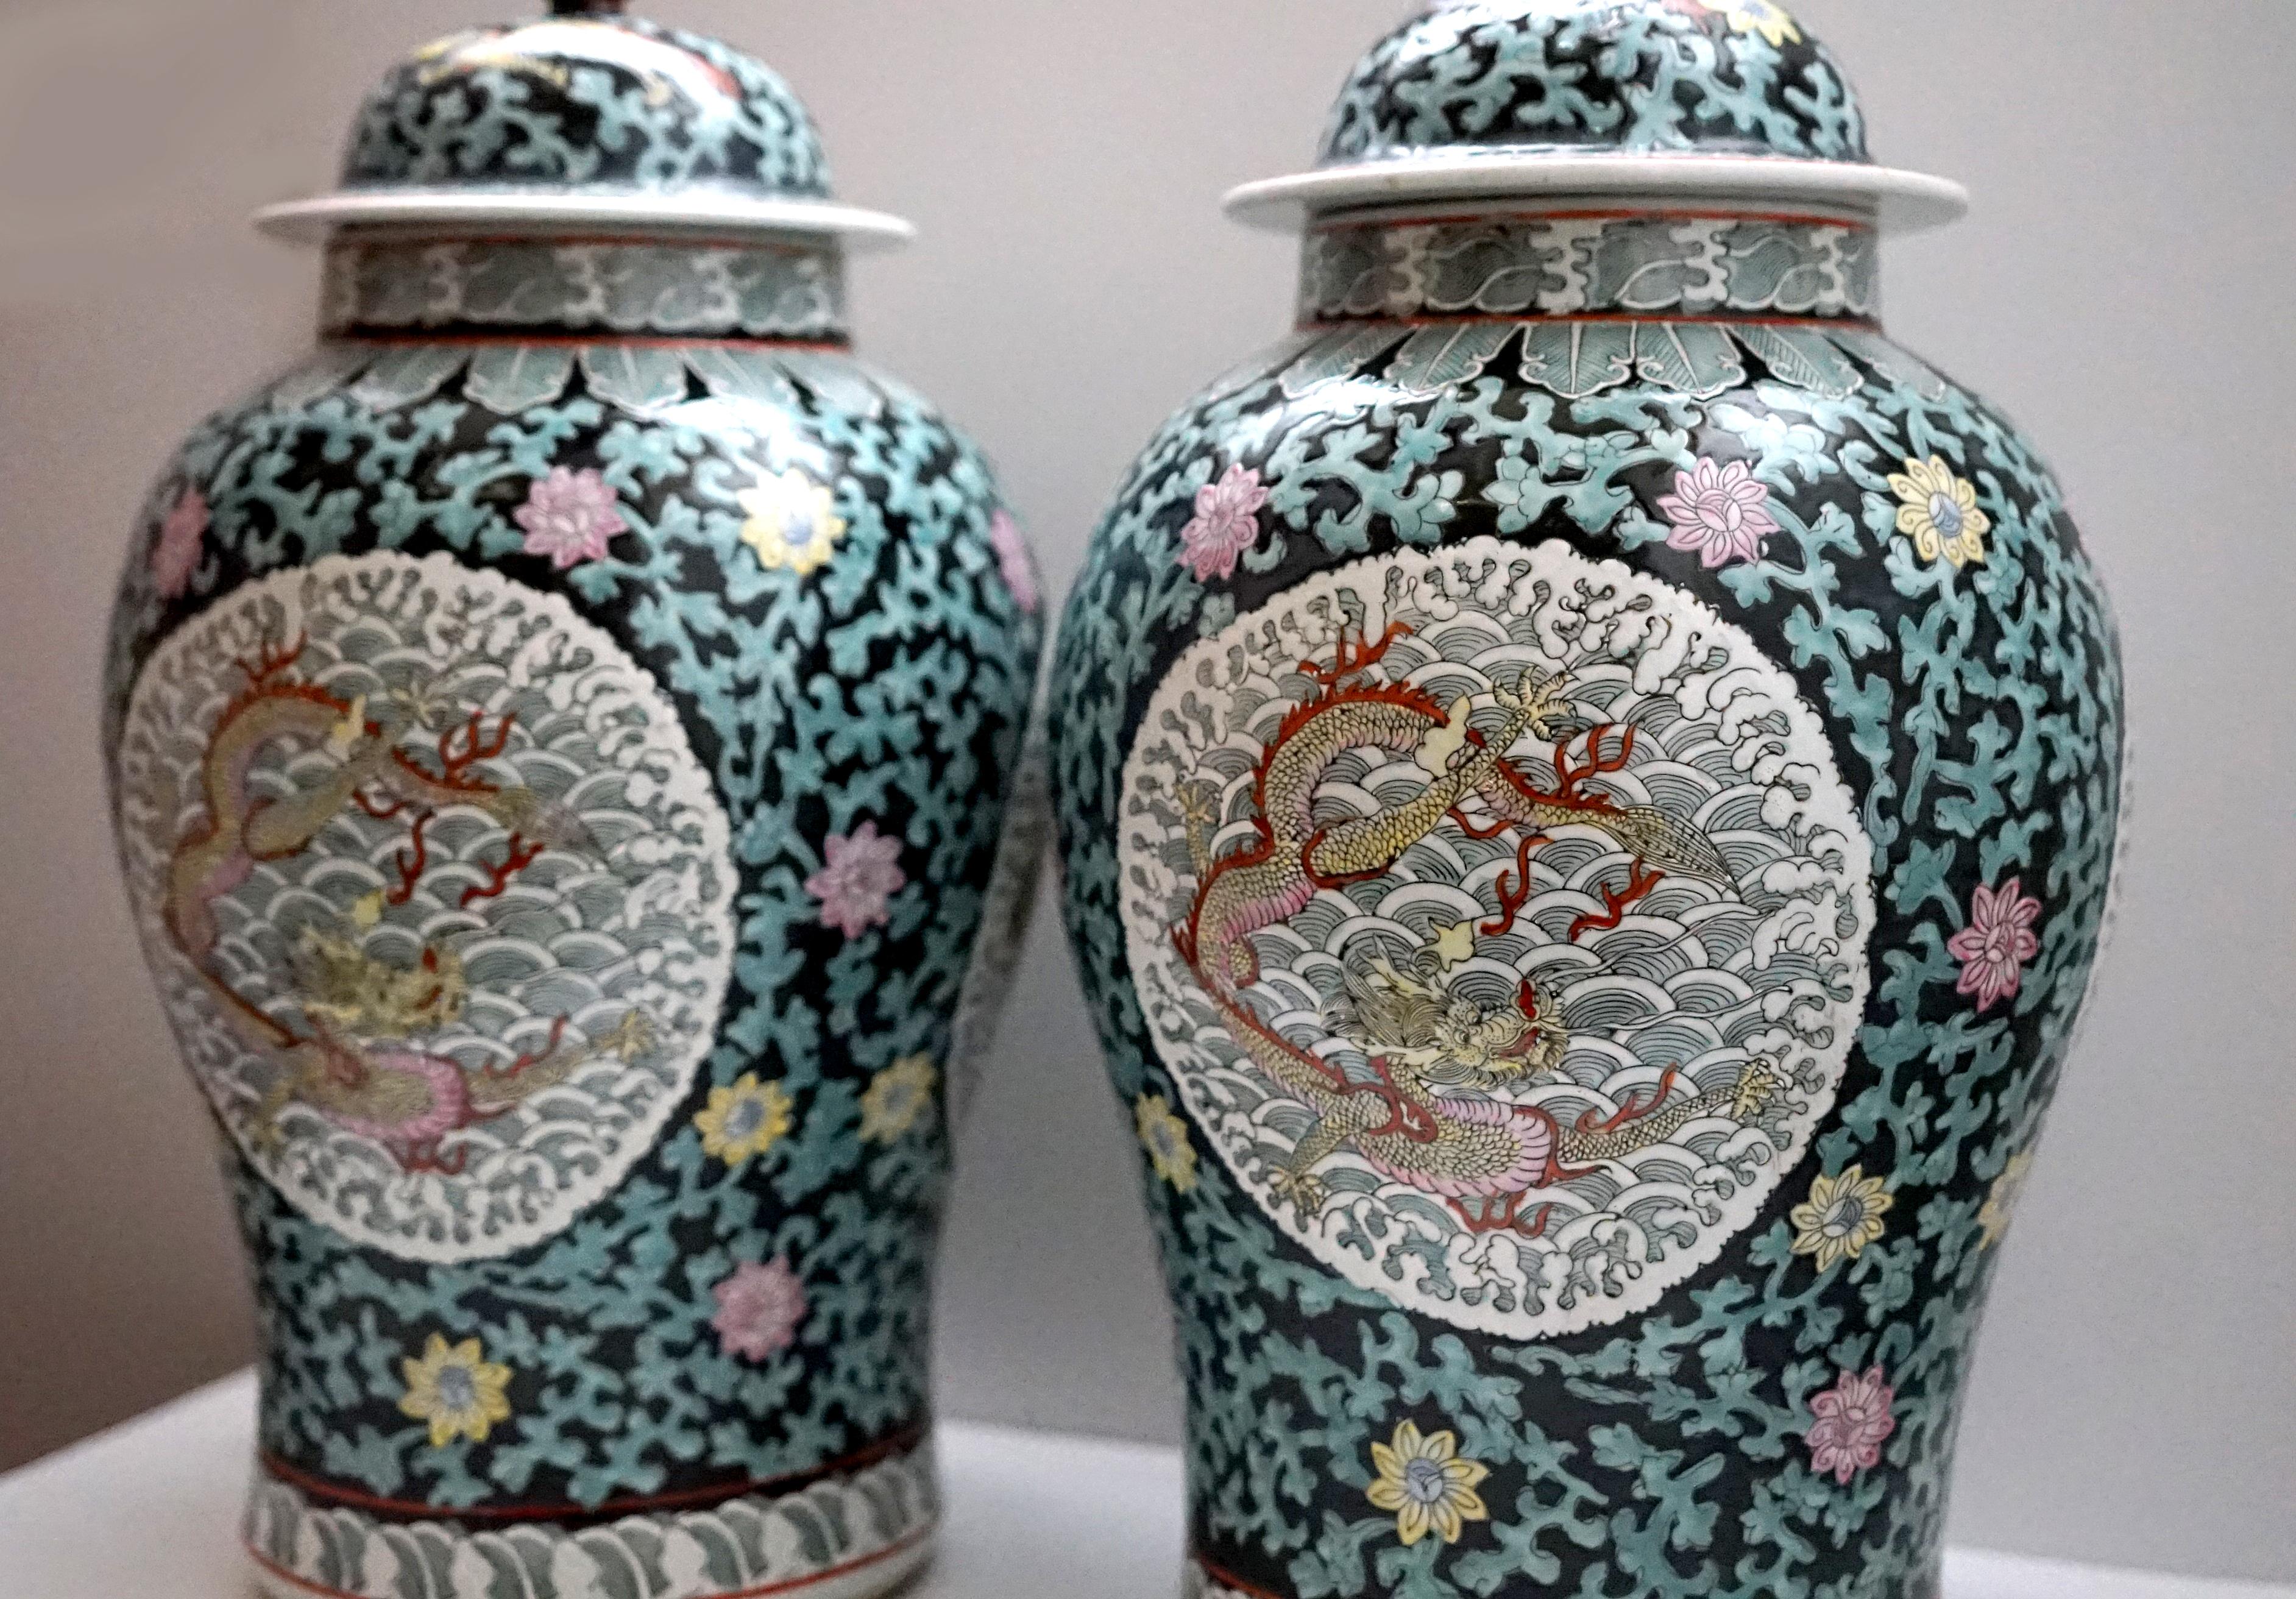 This distinctive pair of dragon temple jars is worth collecting. The blue pattern and design on black ground of dragons are characteristic of the jars, which originated in East Asian temples. This pair bears the traditional auspicious  dragons which